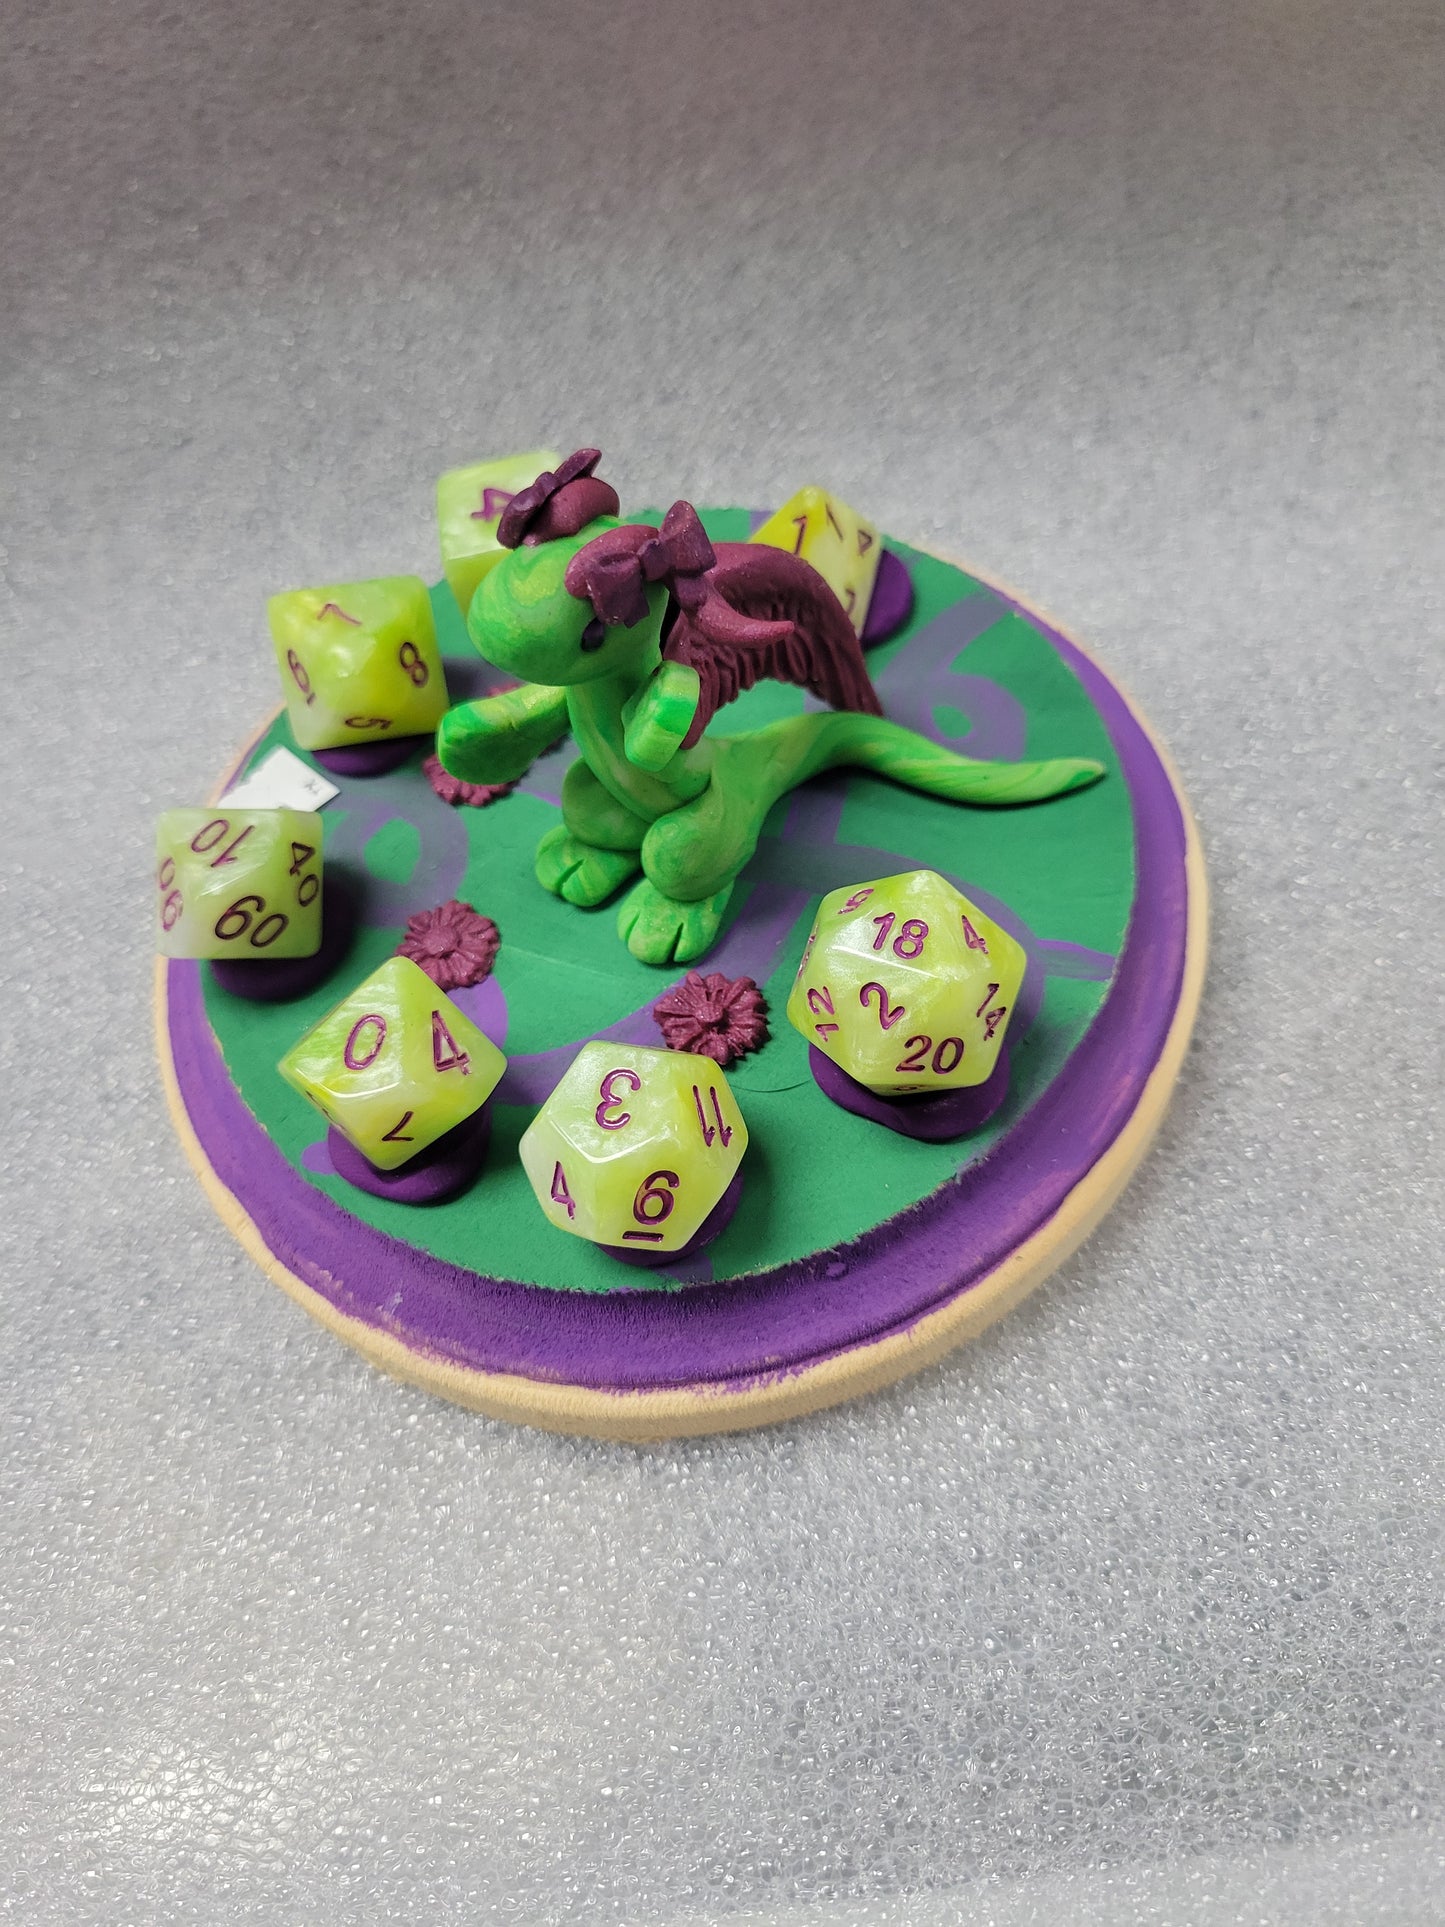 Dice Guardian - 7 Polyhedial Set - Green and Purple